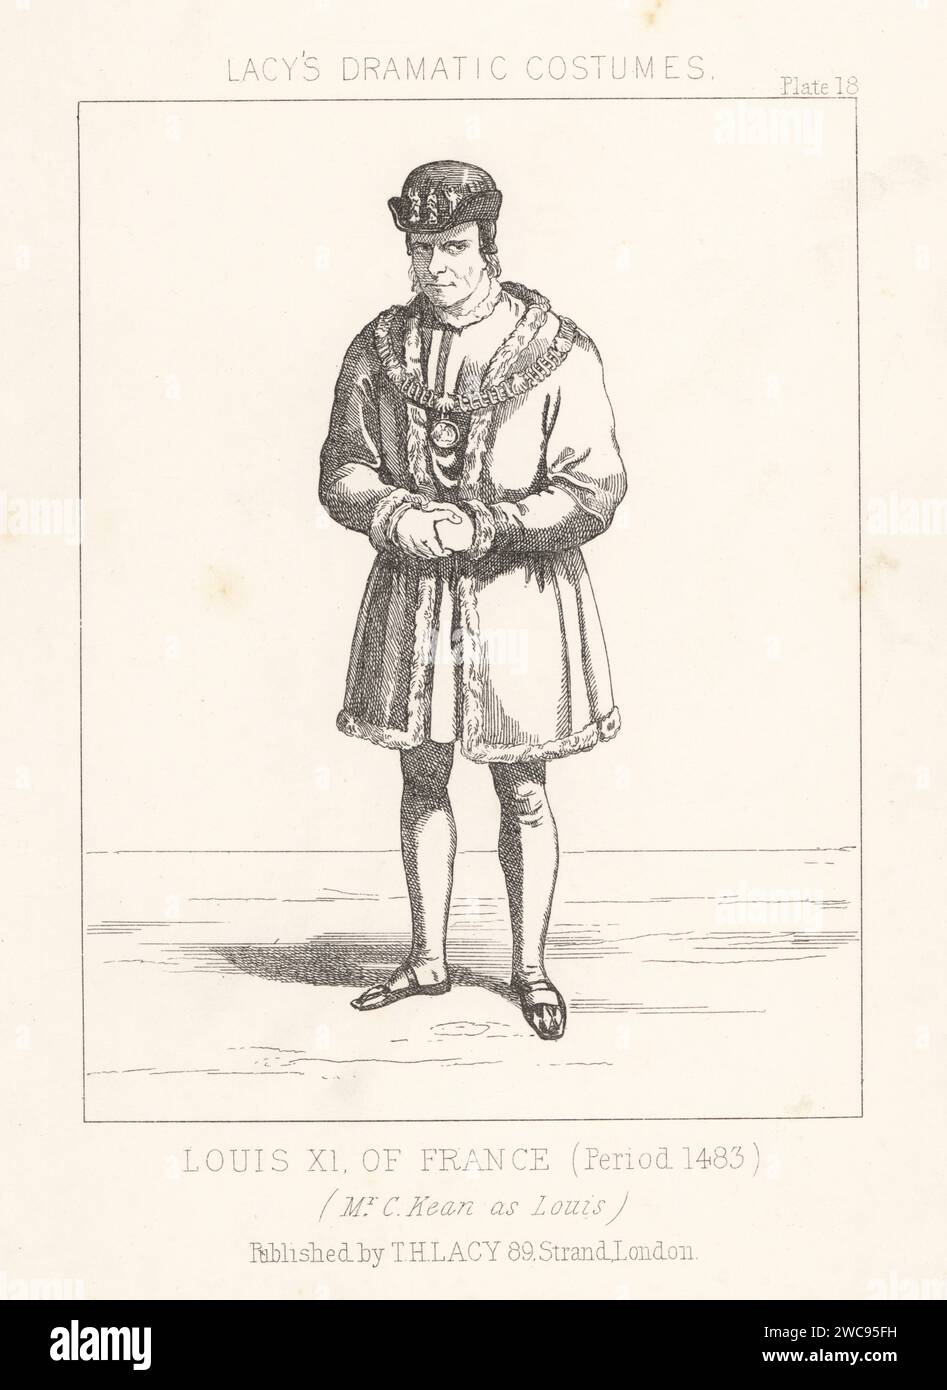 English actor Charles Kean as King Louis XI of France in Dion Boucicault's translation of Casimir Delavigne's play Louis XI, 1855. In cap with figures, fur-lined doublet, hose, wearing the collar of the Order of Saint Michael. Lithograph from Thomas Hailes Lacy's Male Costumes, Historical, National and Dramatic in 200 Plates, London, 1865. Lacy (1809-1873) was a British actor, playwright, theatrical manager and publisher. Stock Photo